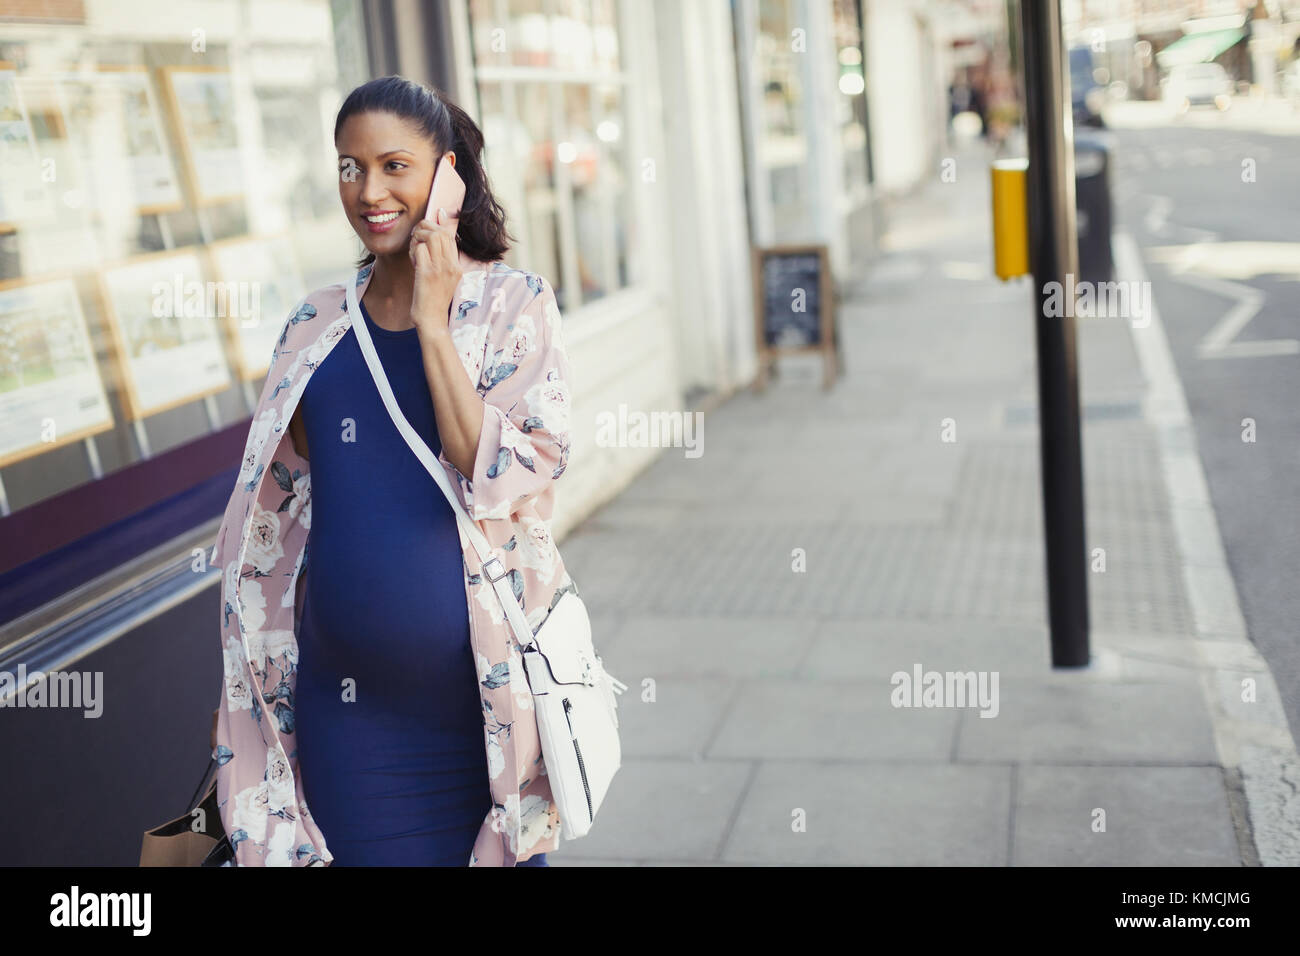 Smiling pregnant woman talking on cell phone, walking along urban storefront Stock Photo